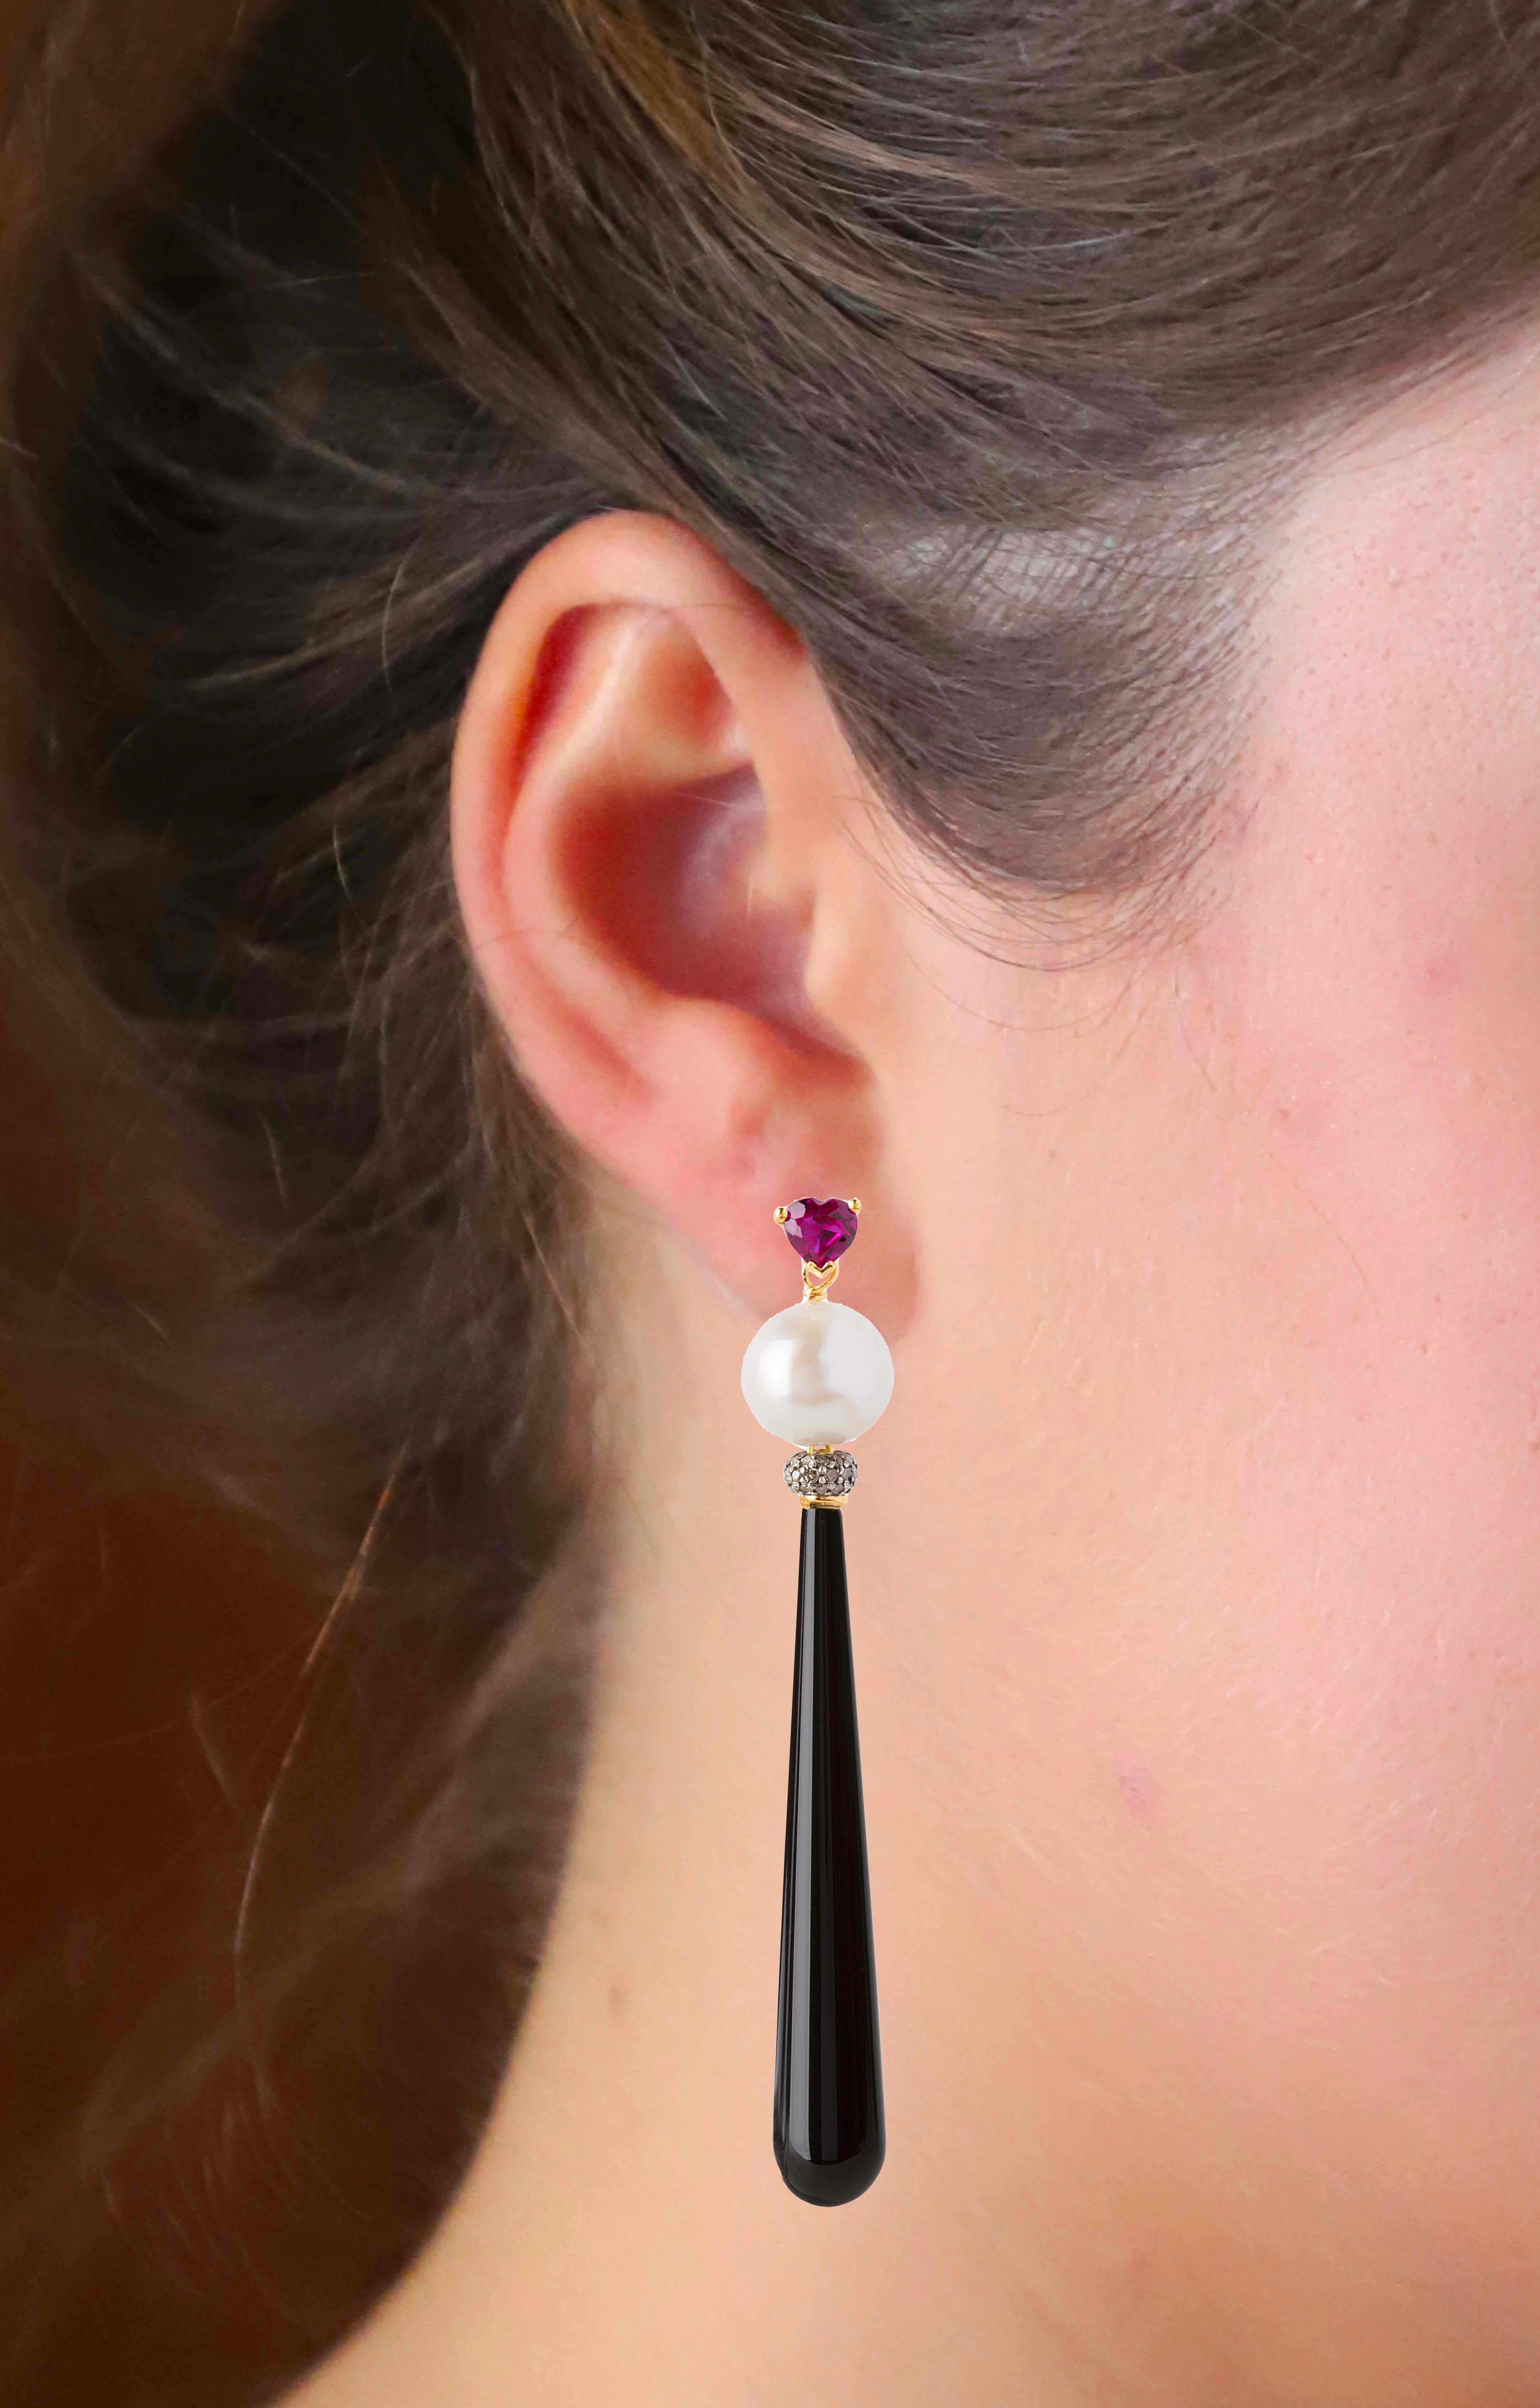 Handcrafted by Rossella Ugolini, these exquisite Deco style earrings in 18K Yellow Gold are an alluring display of elegance. 
The design features a heart-shaped Ruby on the lobe, paired with a white Pearl and a sleek, long drop of black Onyx adorned